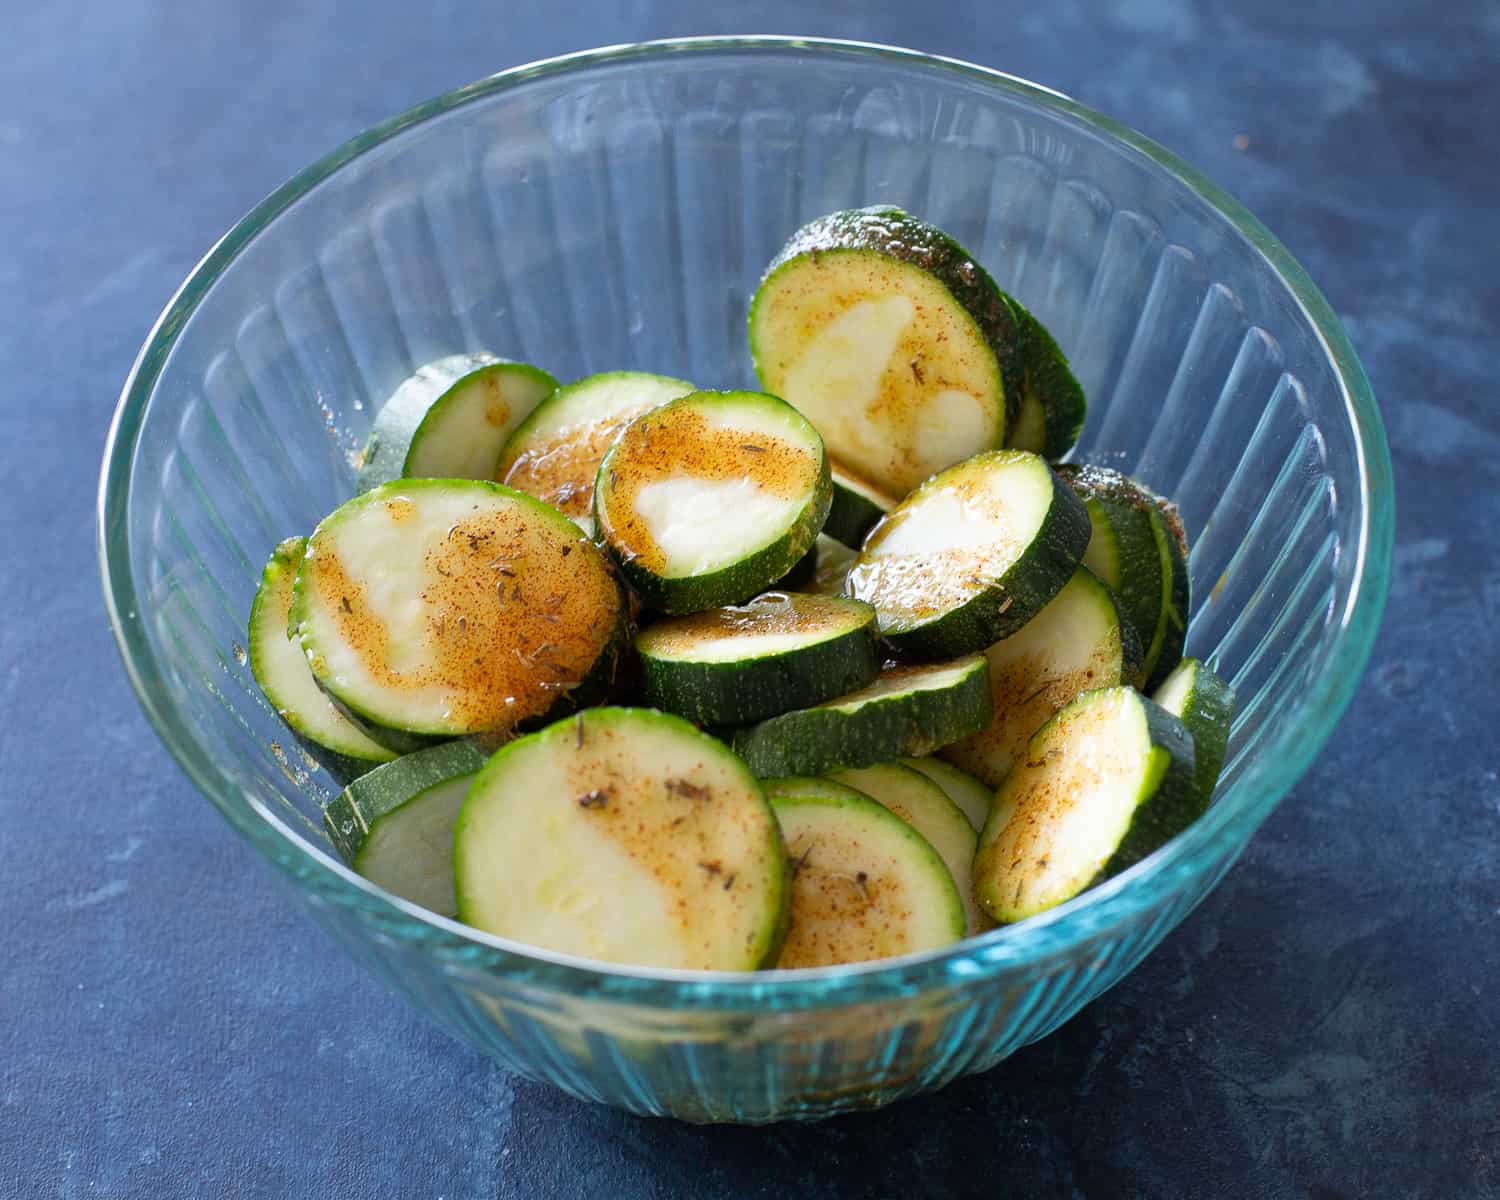 zucchini with oil and herbs